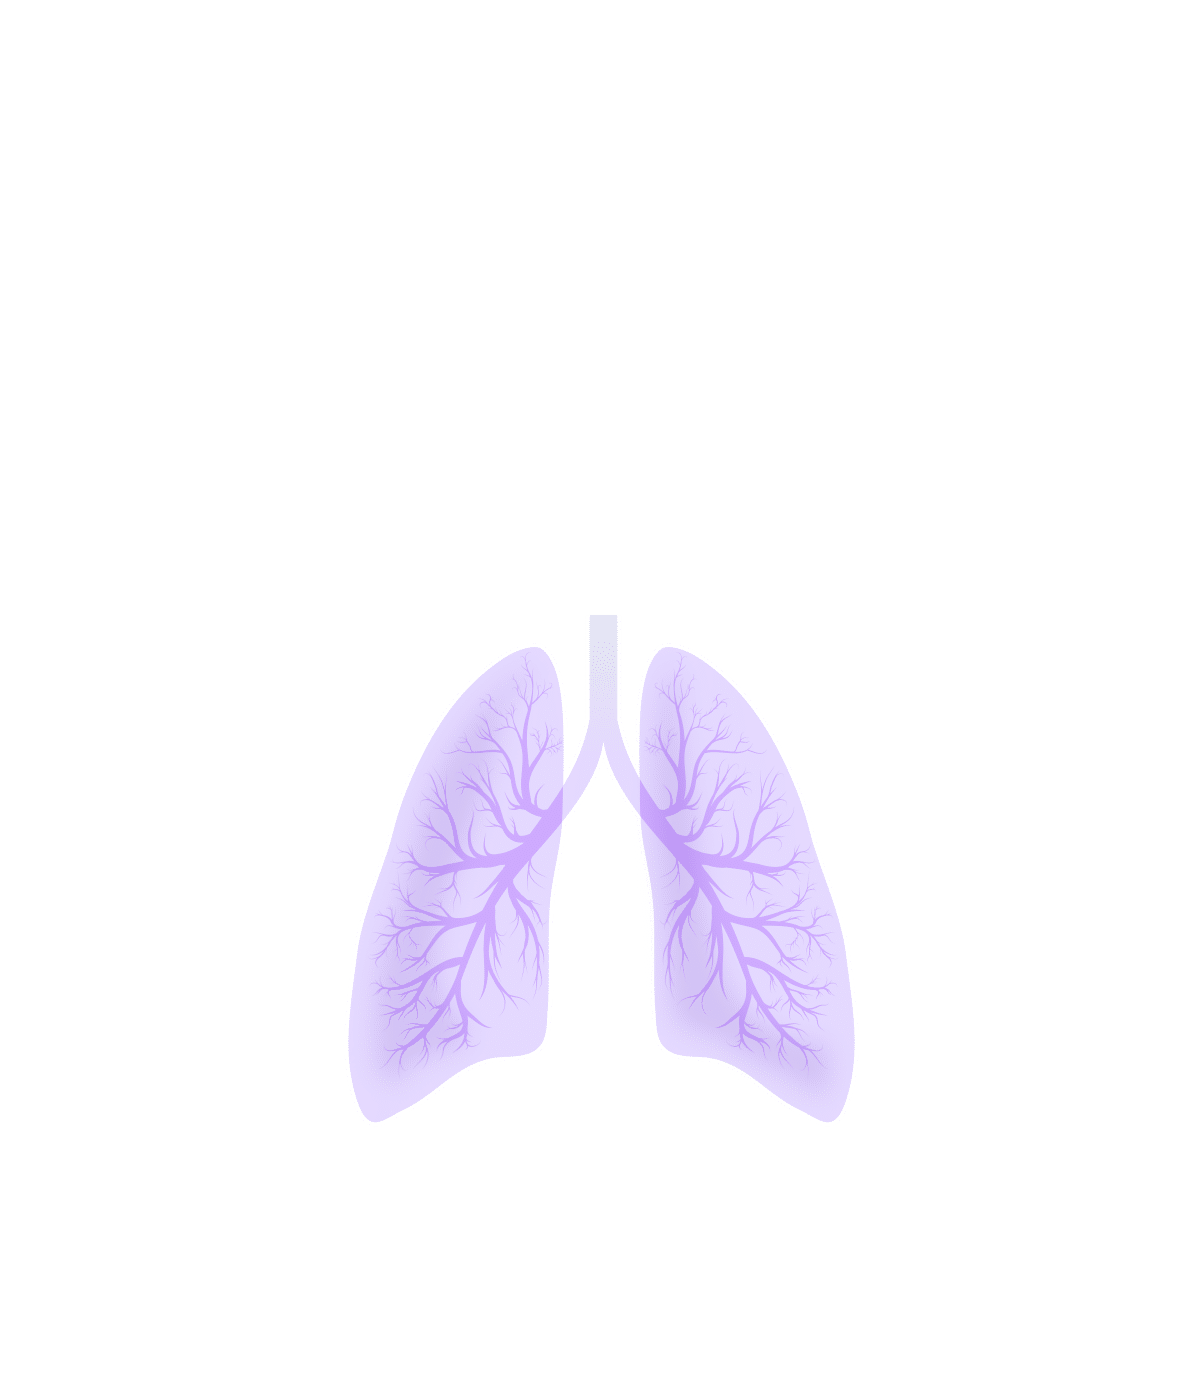 How Covid Affects the Body interactive graphic - Dimmed lungs